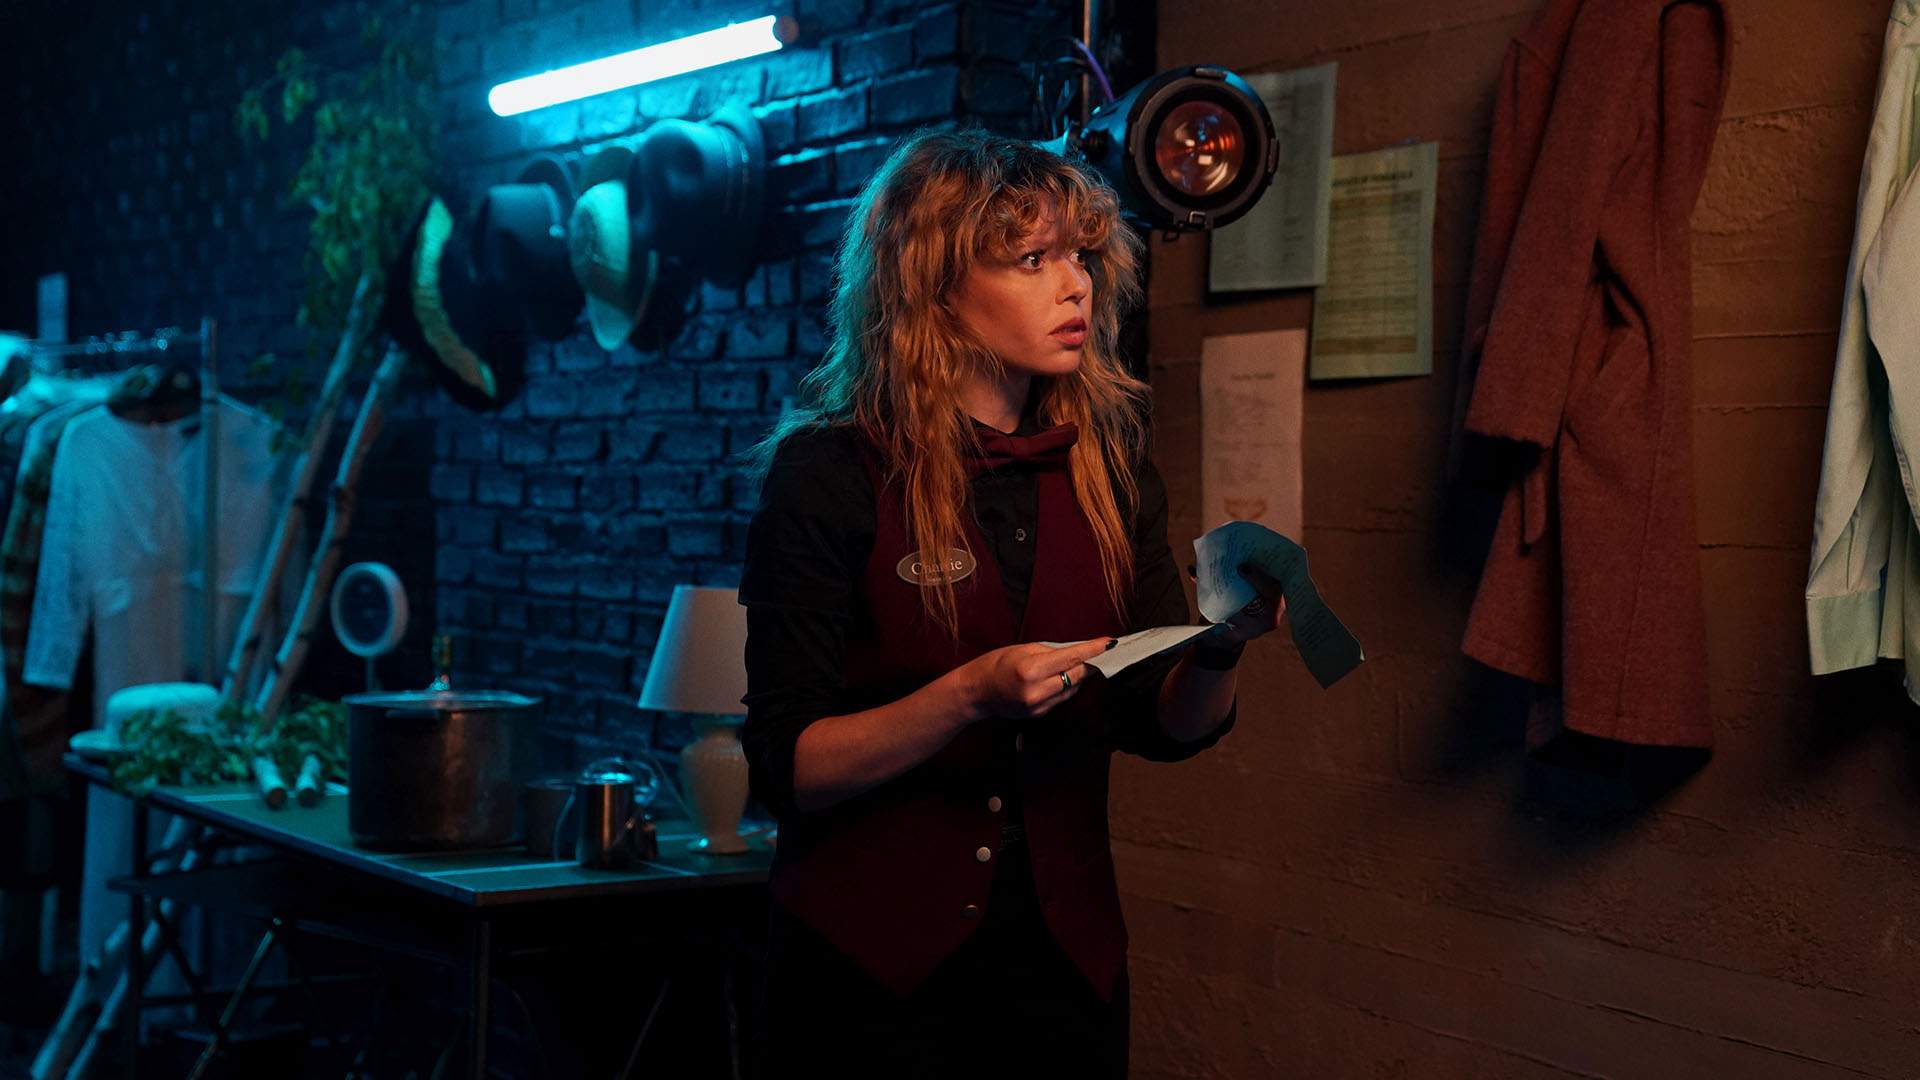 All In: Natasha Lyonne-Starring Sleuth Series 'Poker Face' Has Been Renewed for Season Two